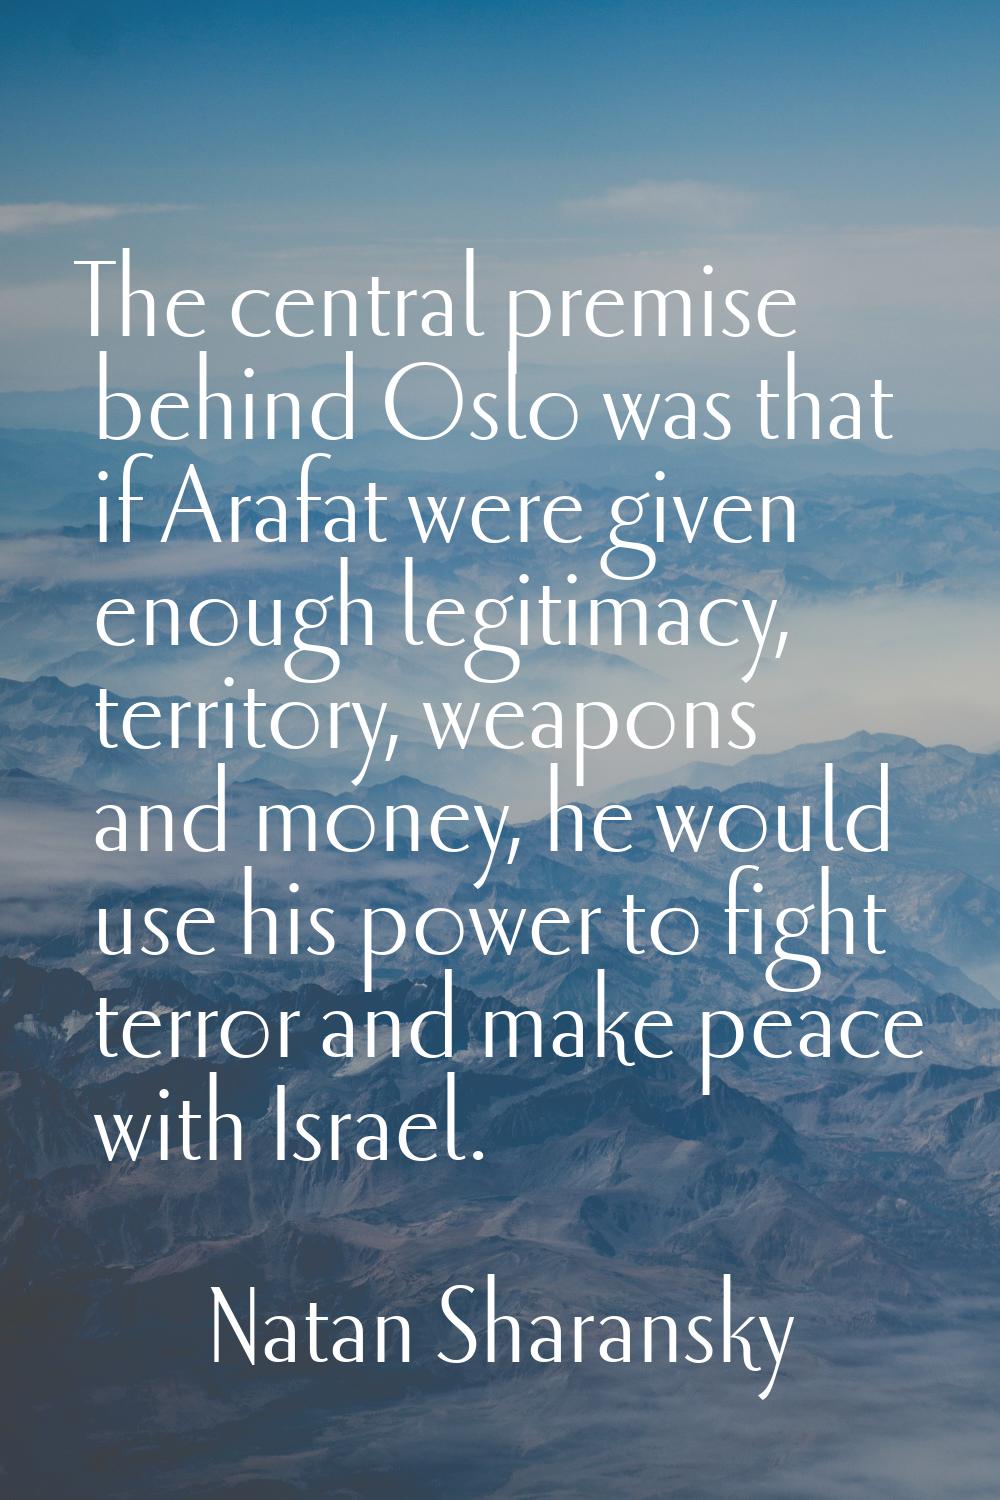 The central premise behind Oslo was that if Arafat were given enough legitimacy, territory, weapons